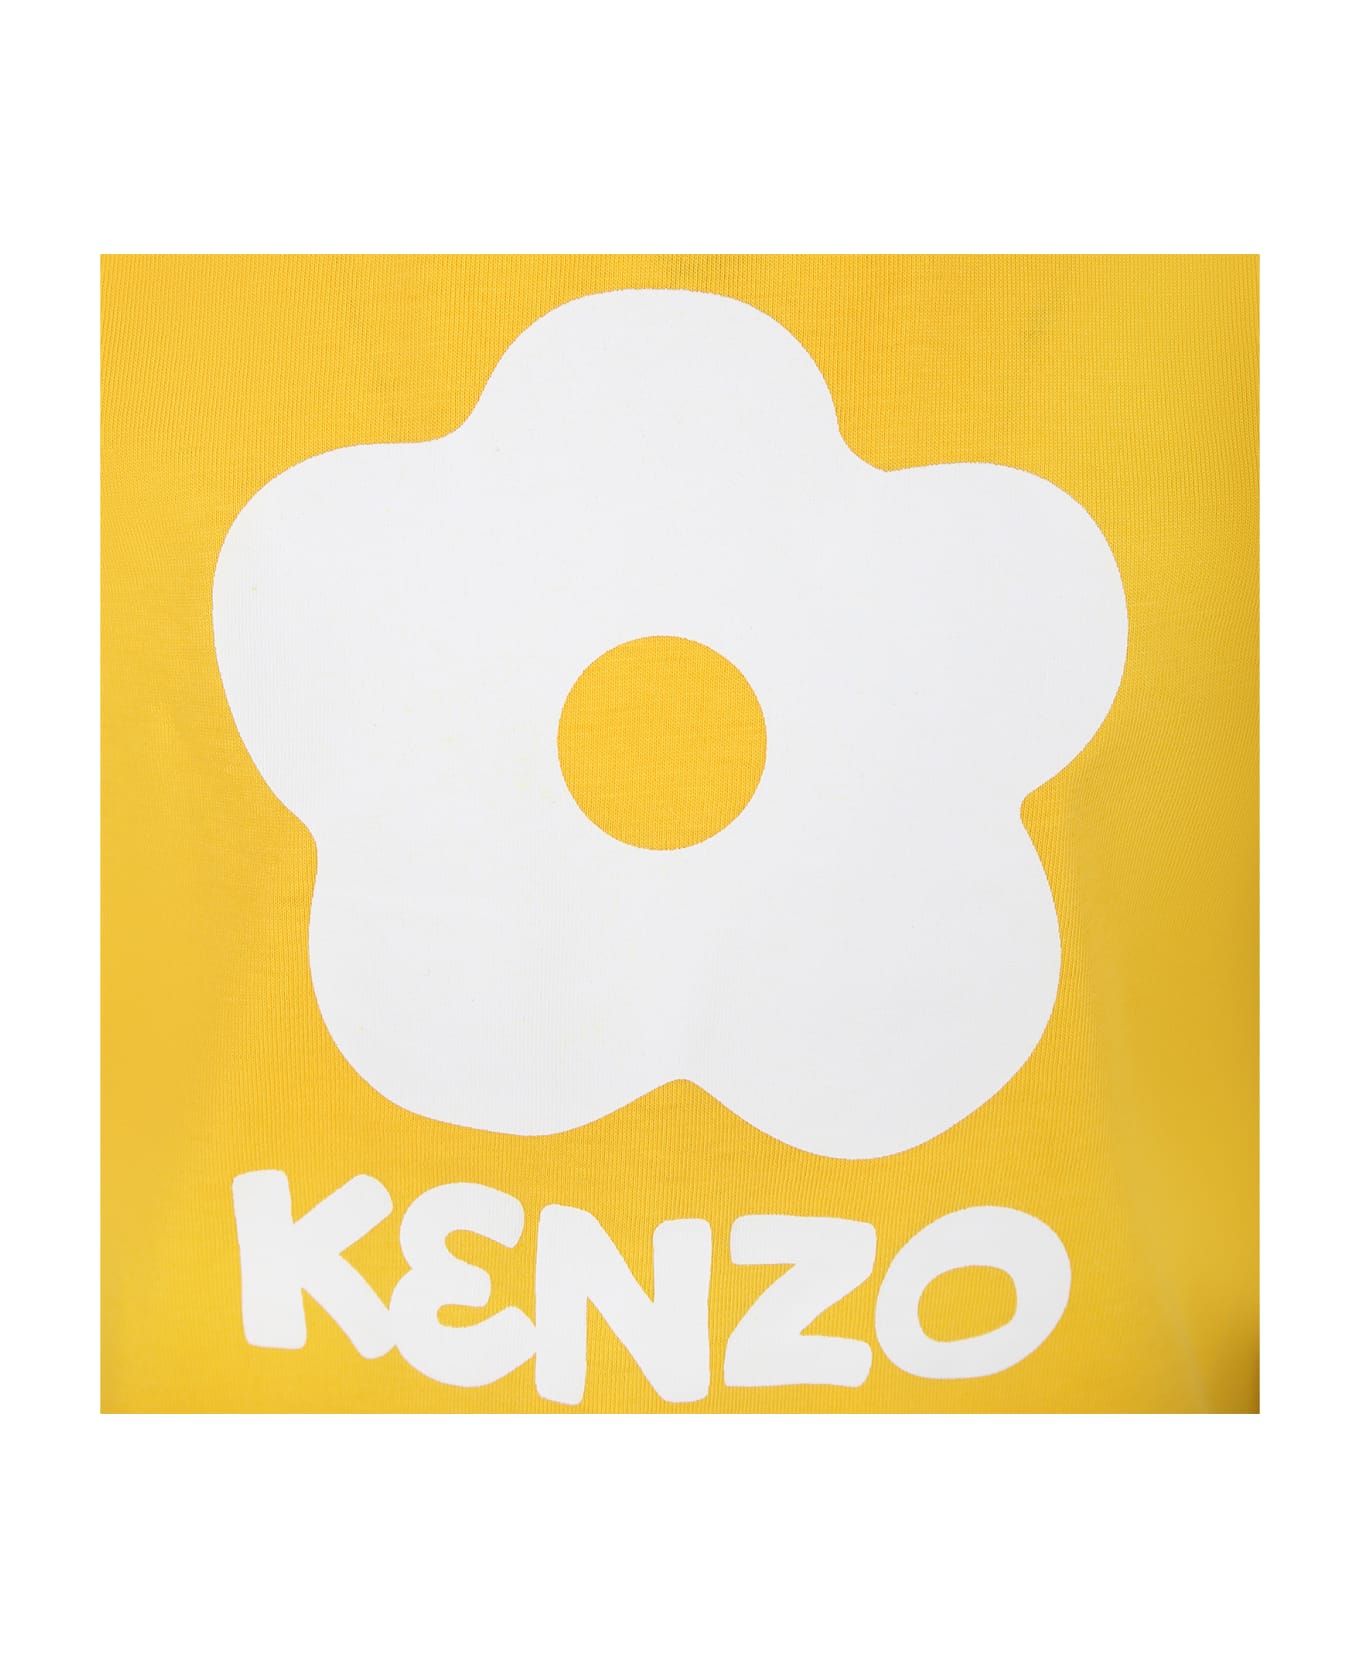 Kenzo Kids Yellow T-shirt For Girl With Flower - Yellow